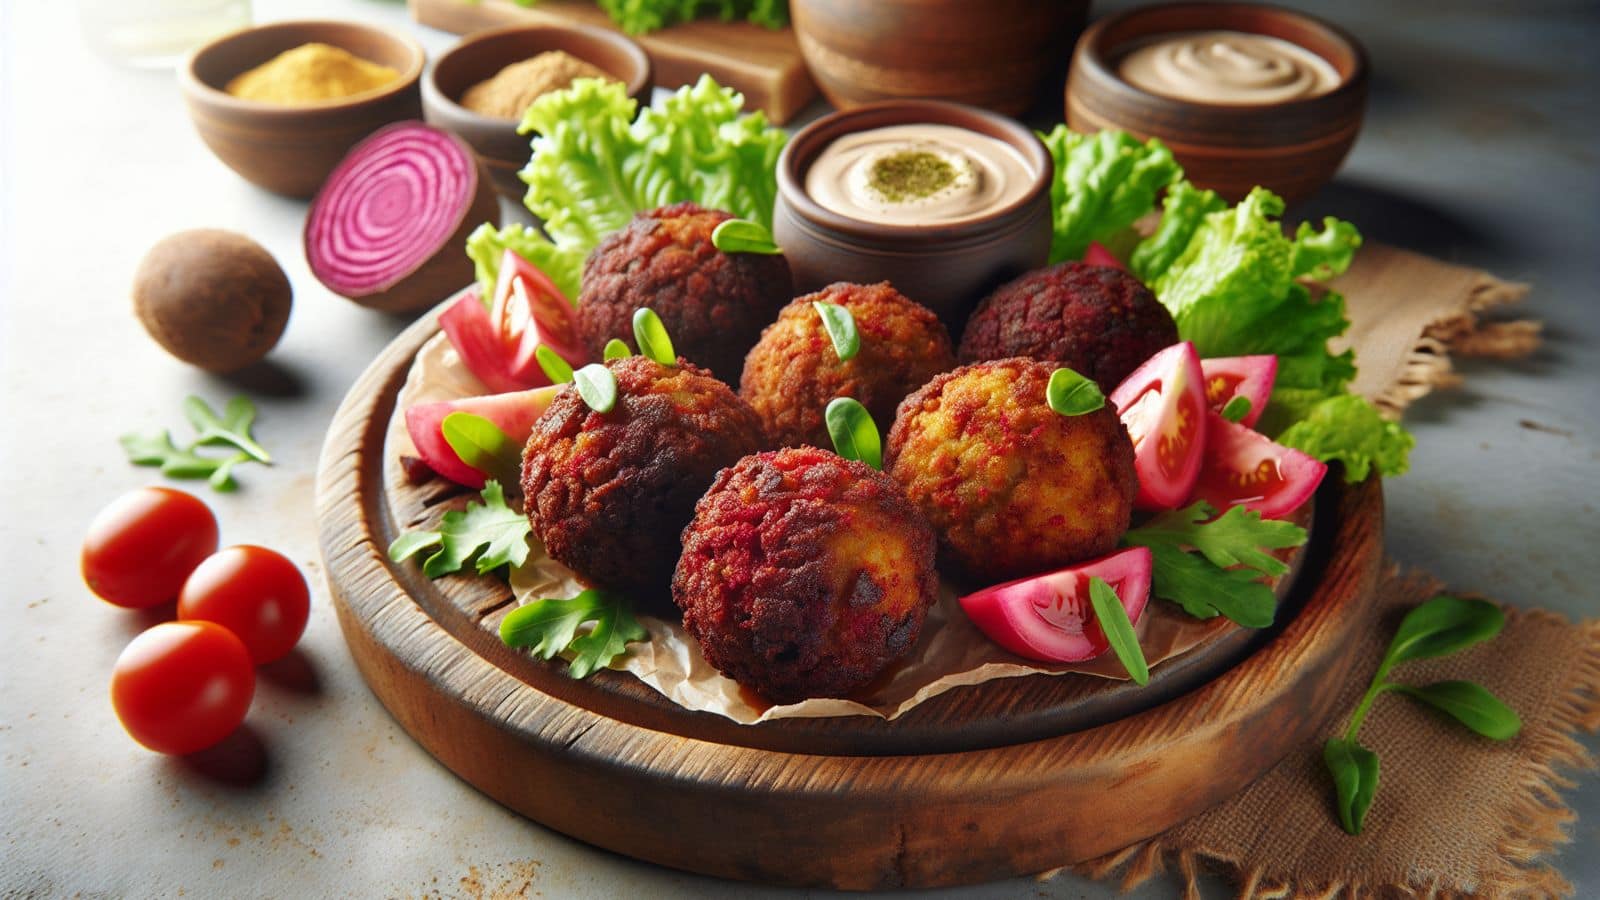 Try this beetroot falafel recipe at home